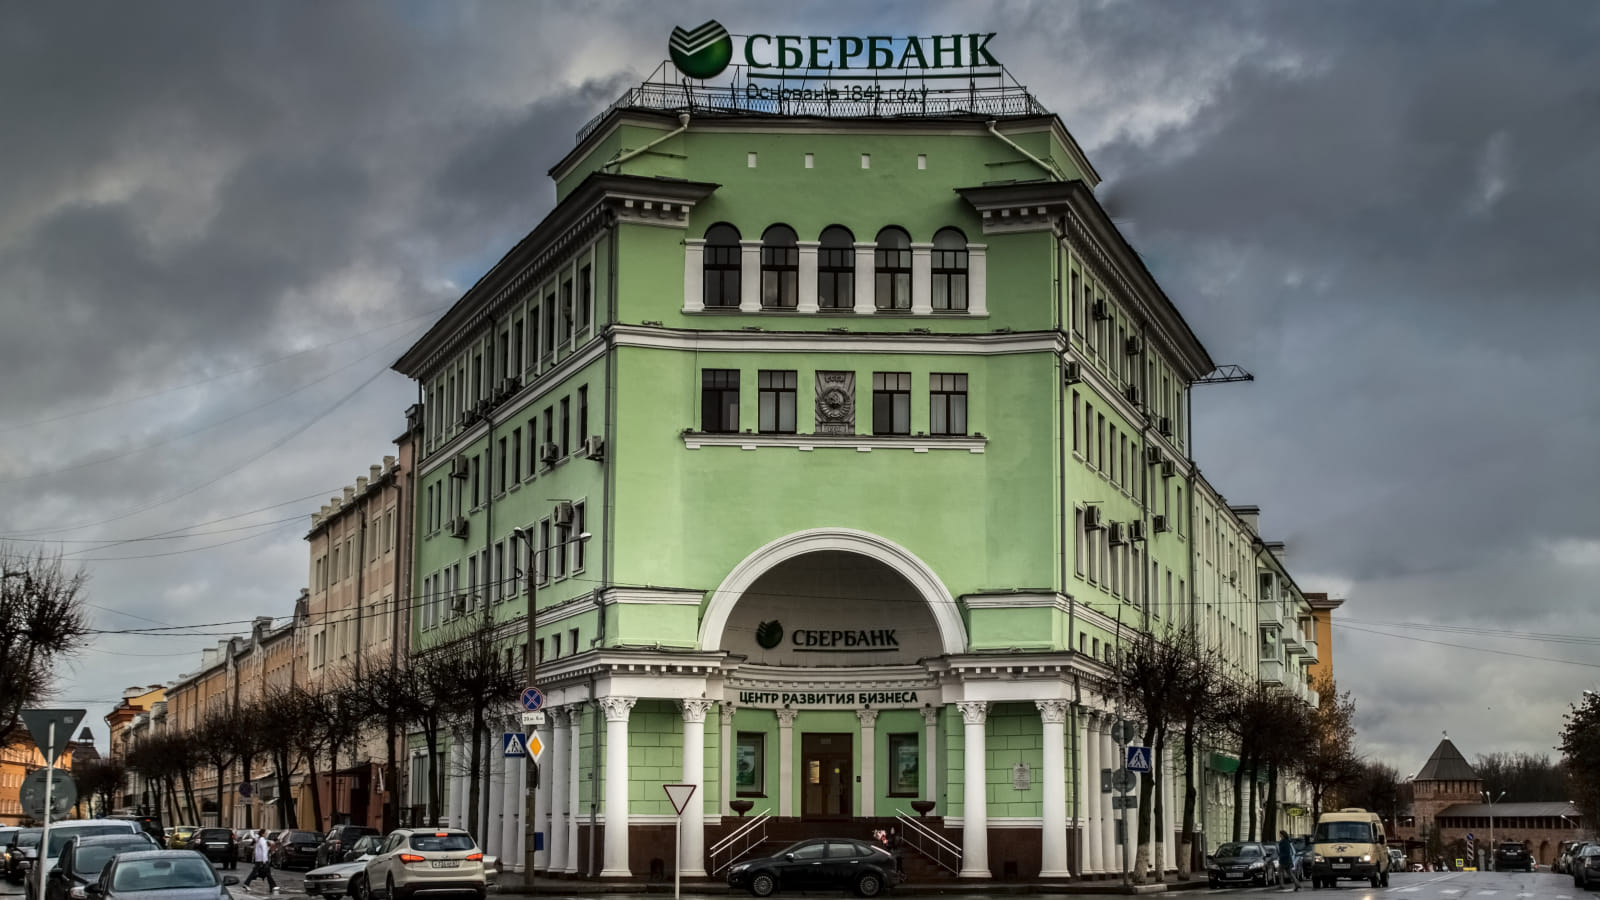 Russian state-owned Sberbank hit by 1 million RPS DDoS attack